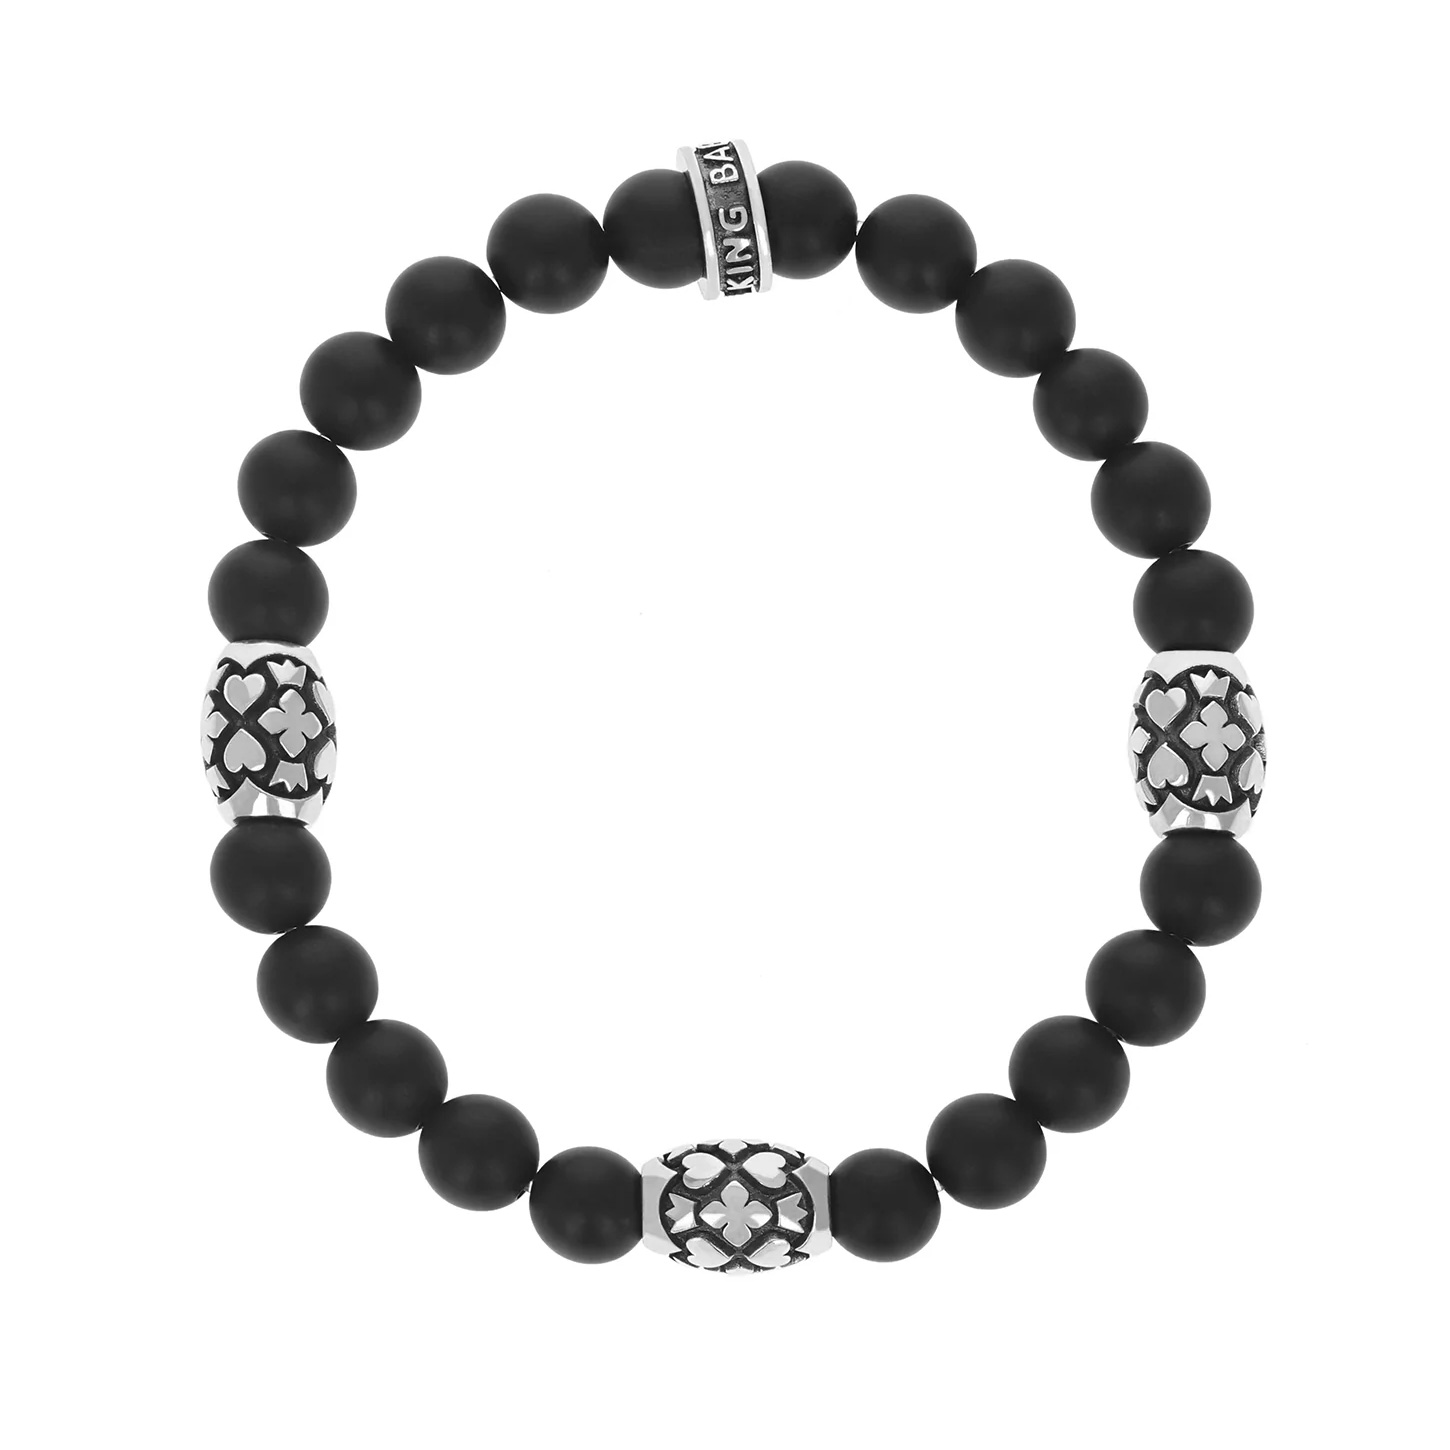 King Baby Black Onyx Beaded Bracelet with 3 Sterling Silver Motif Barrel Beads | 8.75 Inches -  K40-3406-8.75